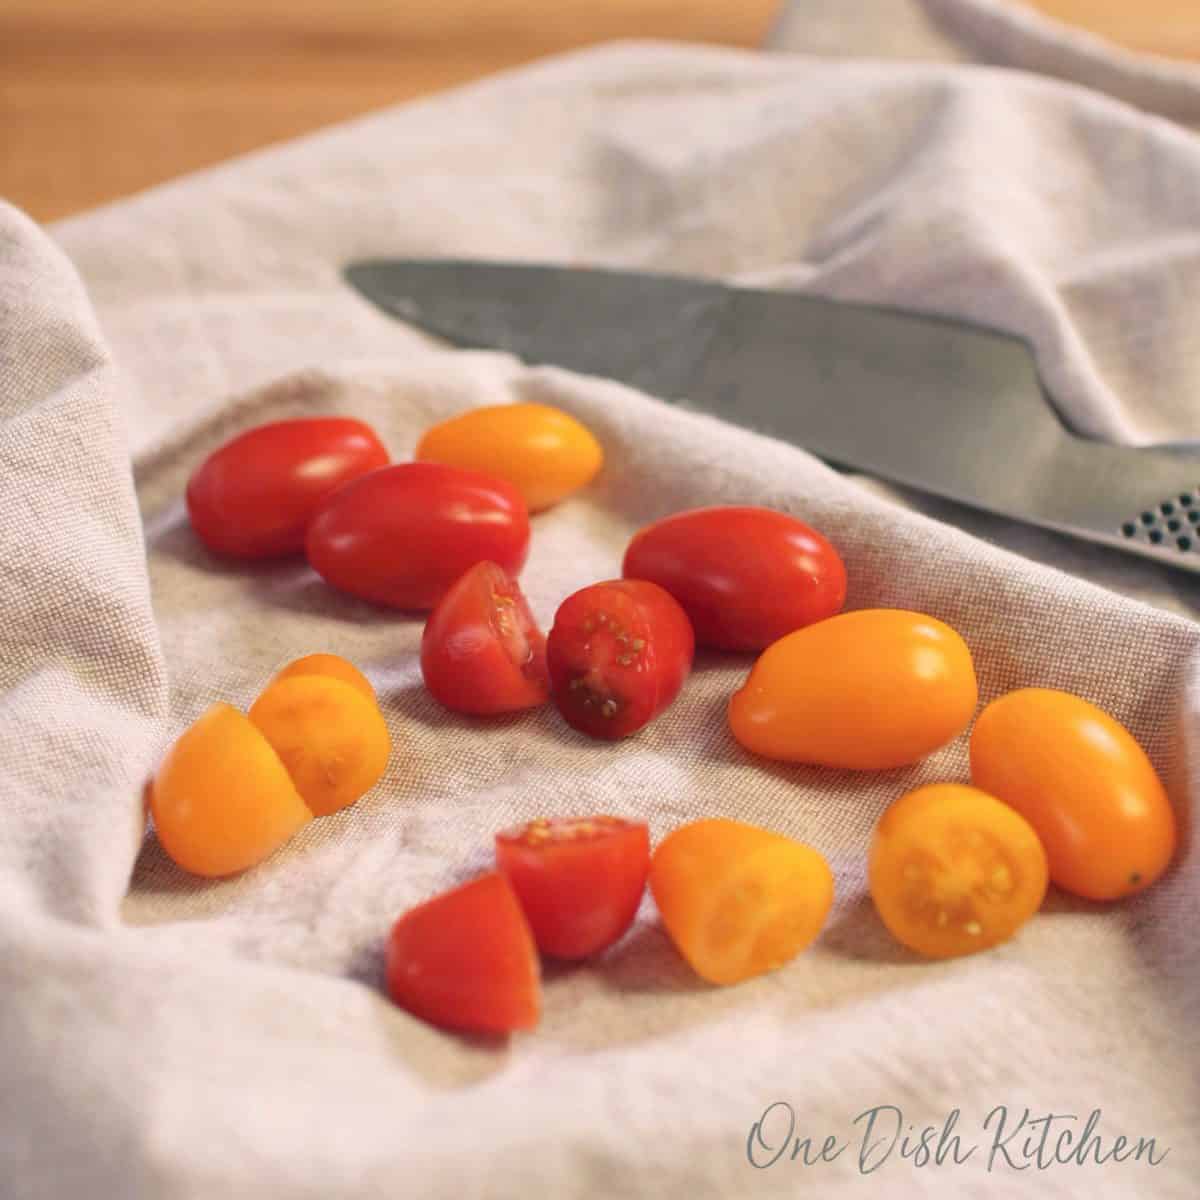 a scattering of red and yellow cherry tomatoes on a tan colored napkin next to a sharp knife.